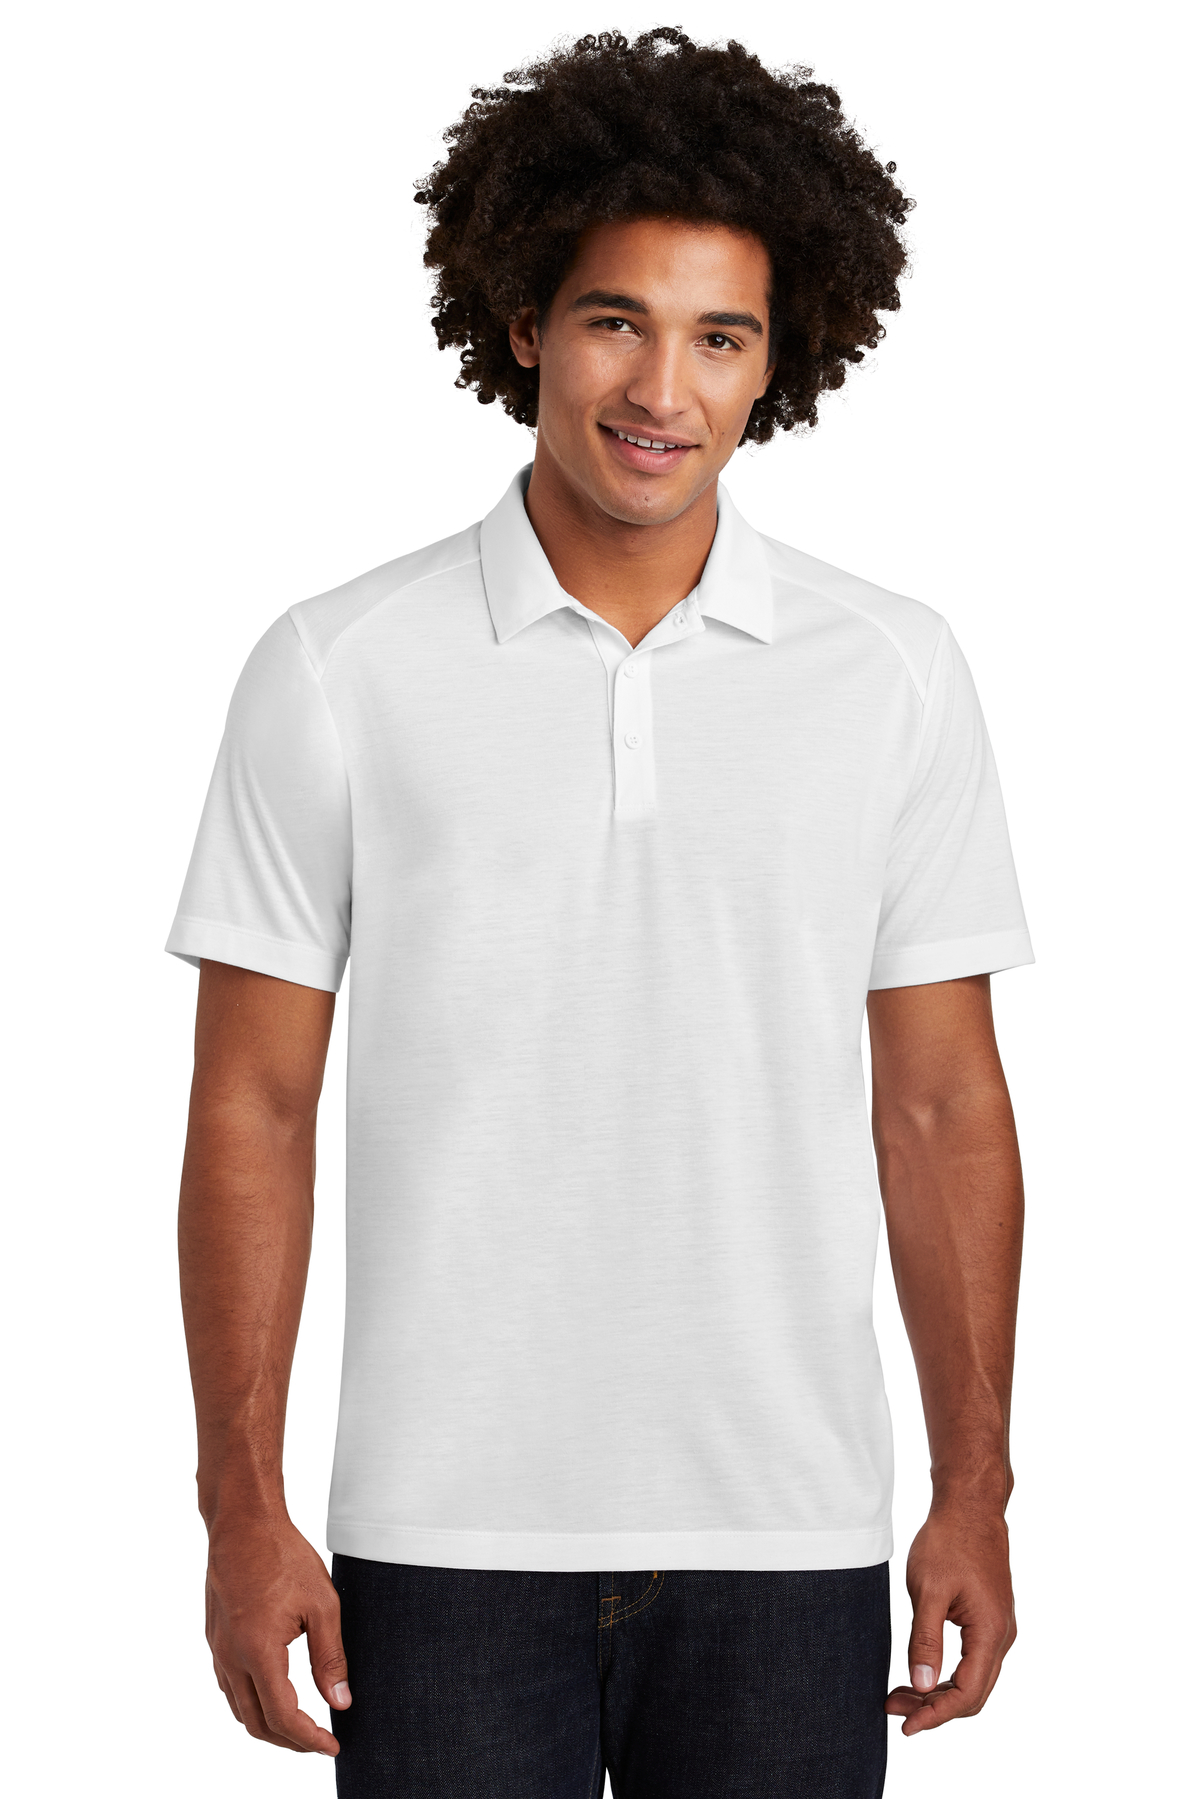 Sport-Tek Embroidered Men's PosiCharge Tri-Blend Wicking Polo | Polos ...